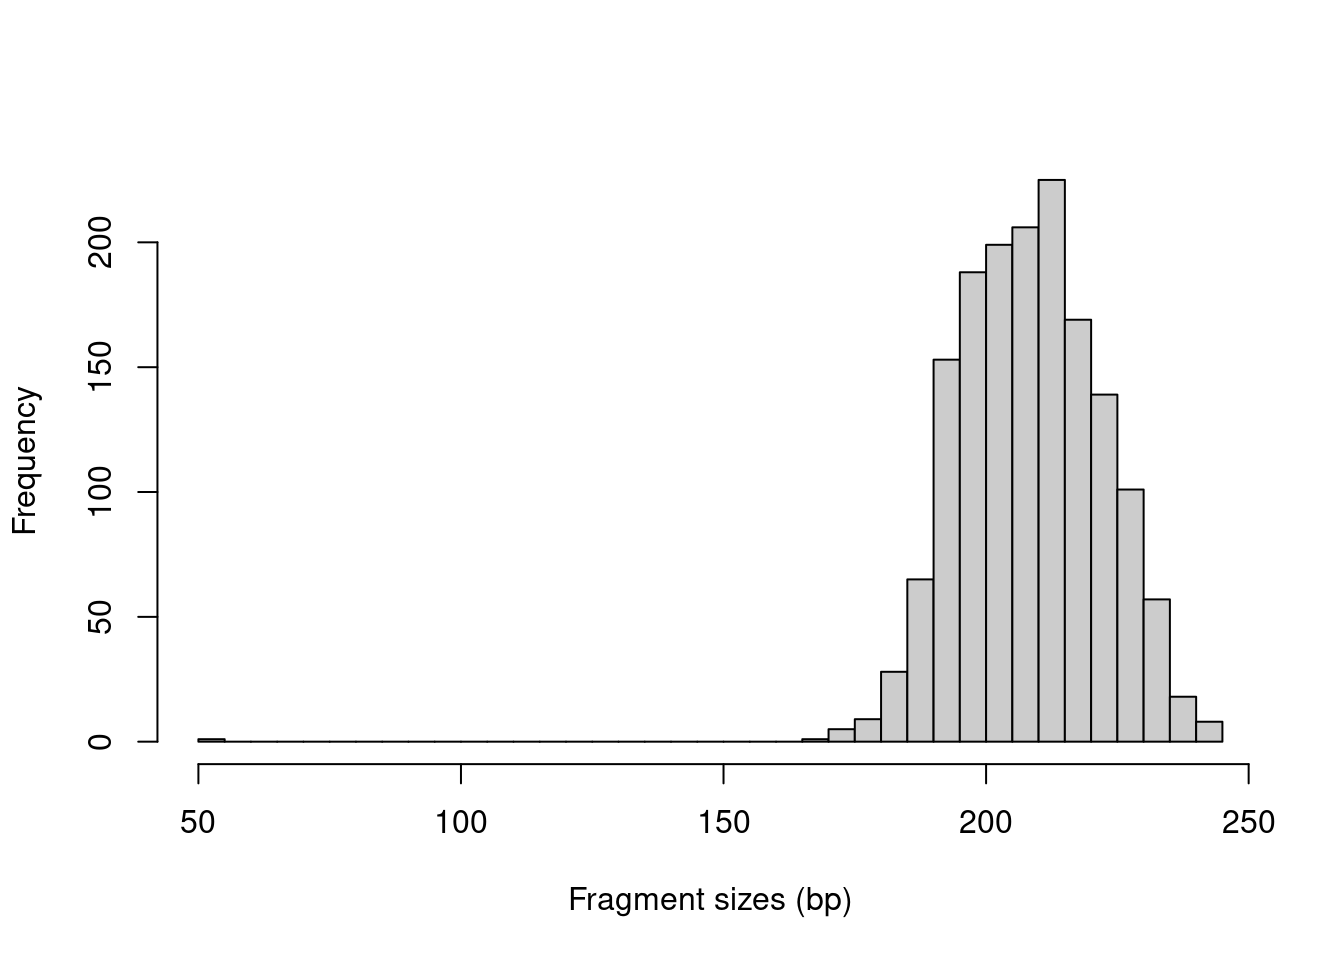 Distribution of fragment sizes in an example paired-end dataset.